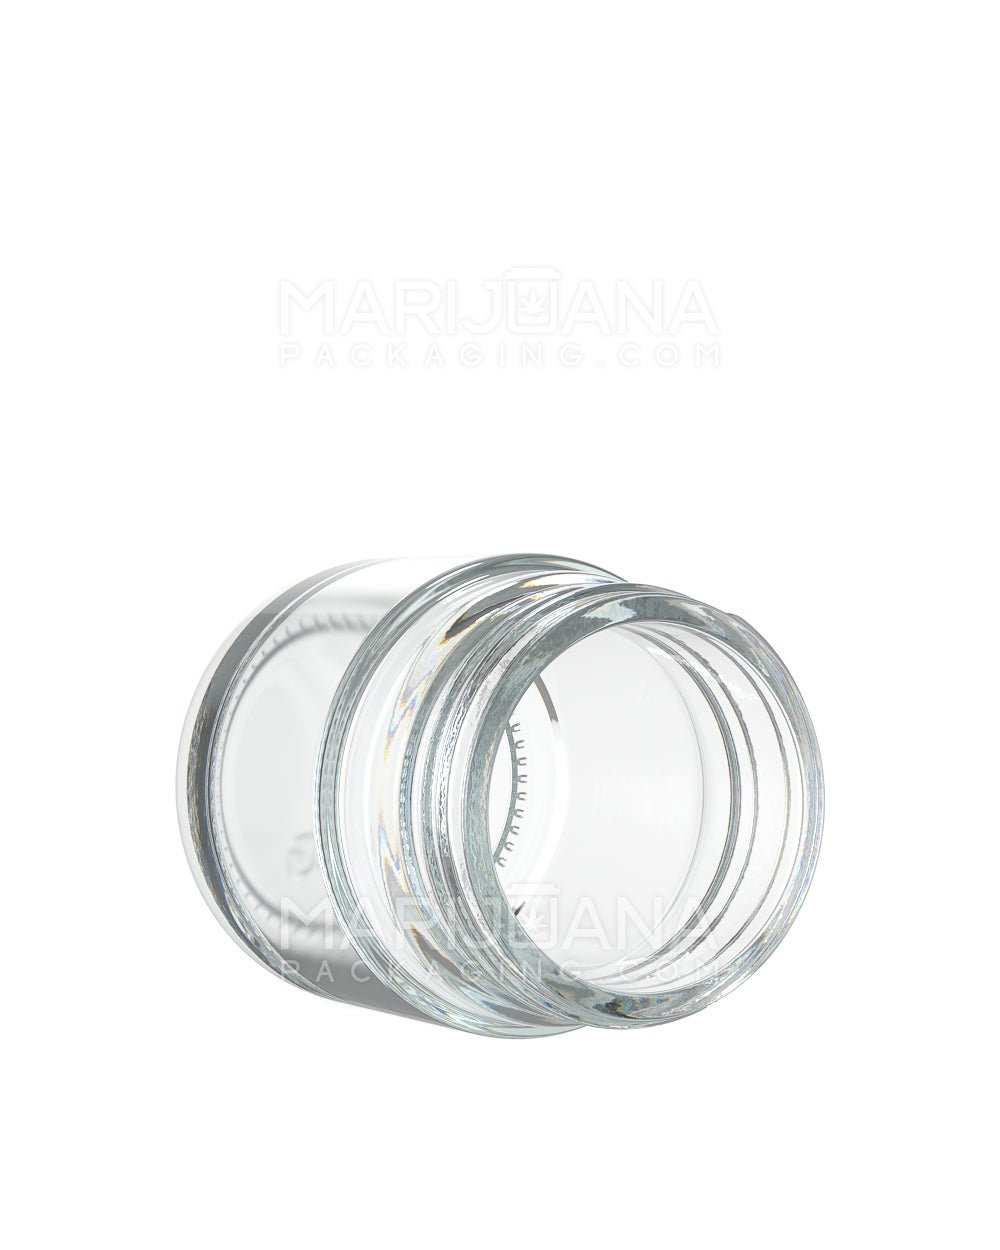 POLLEN GEAR | HiLine Straight Sided Clear Glass Jars | 45mm - 2.5oz - 72 Count - 3